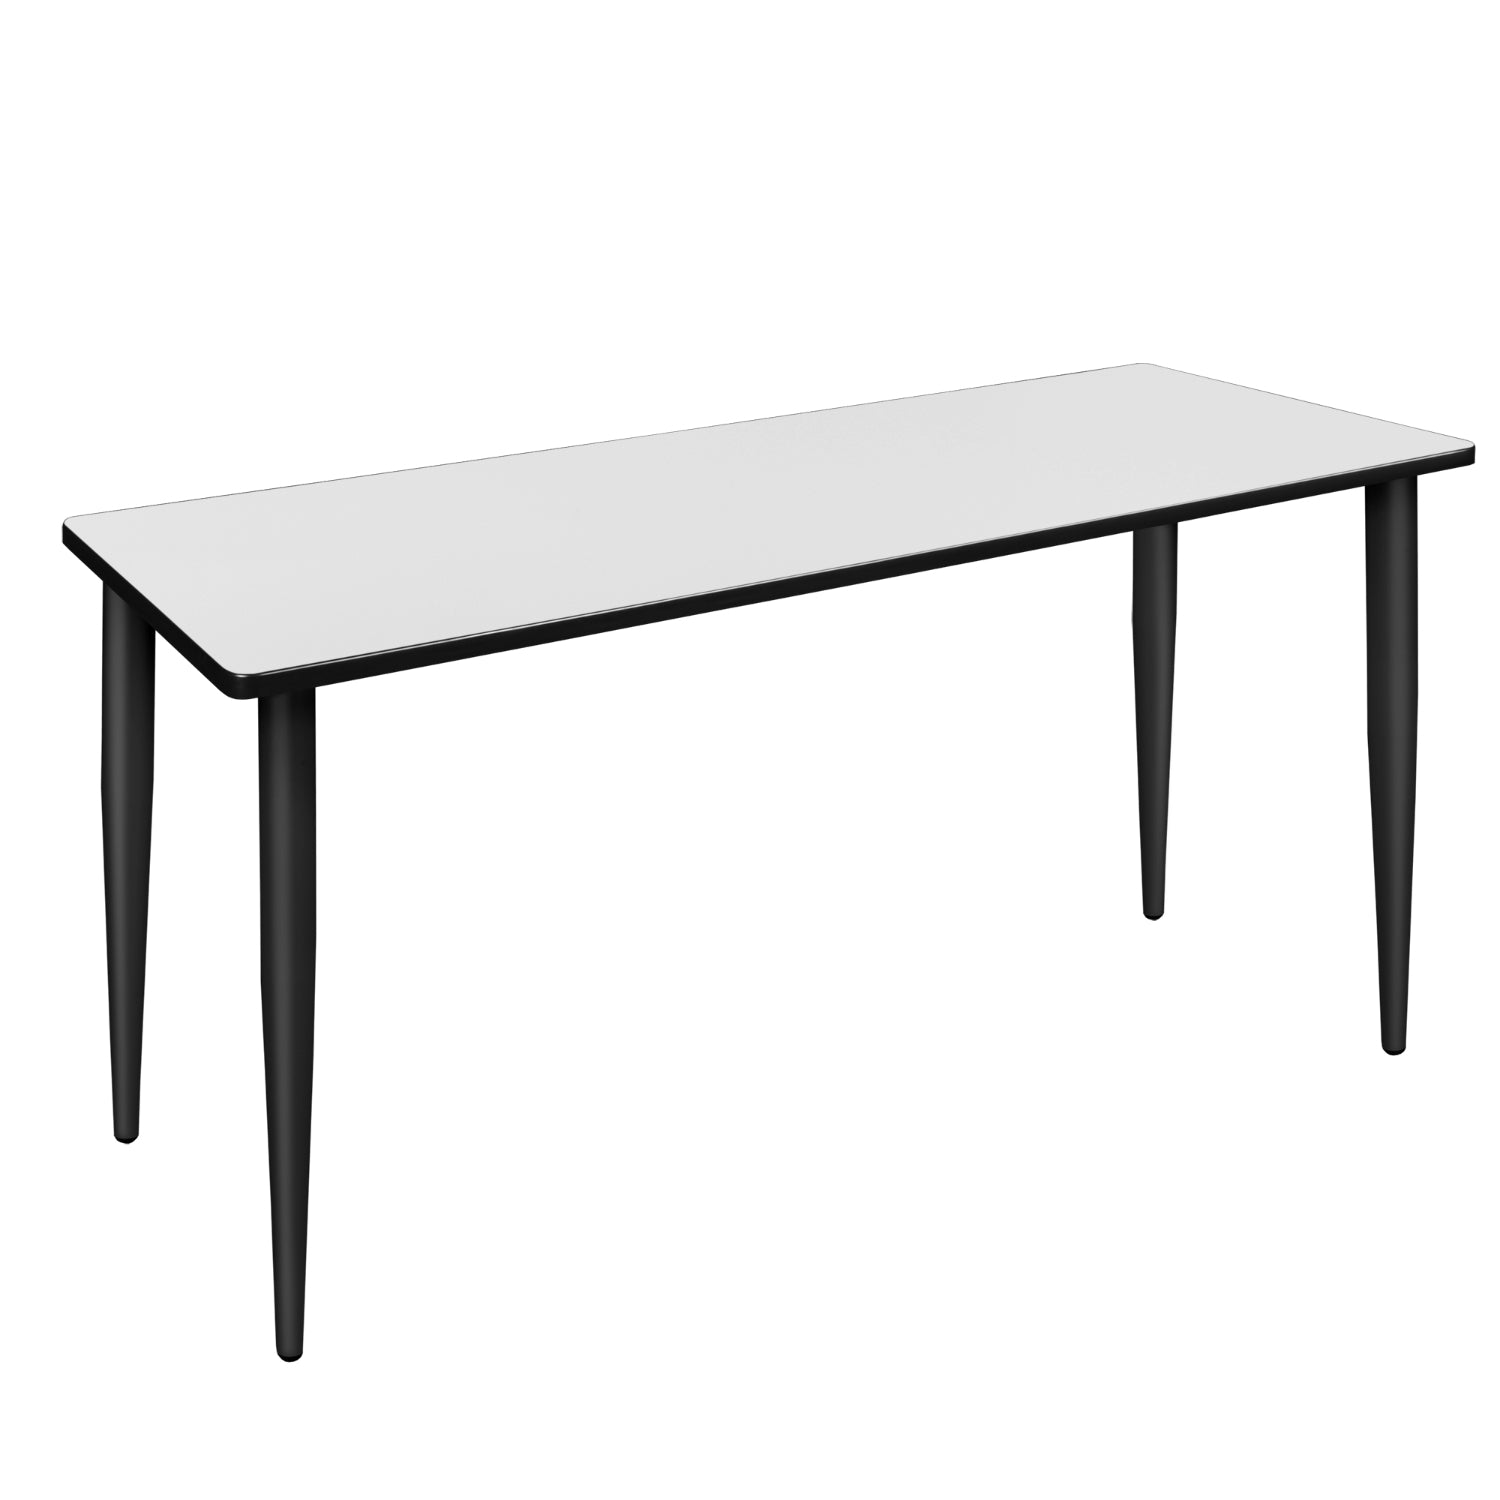 Kahlo 66" x 24" Training/Seminar Table with Tapered Legs